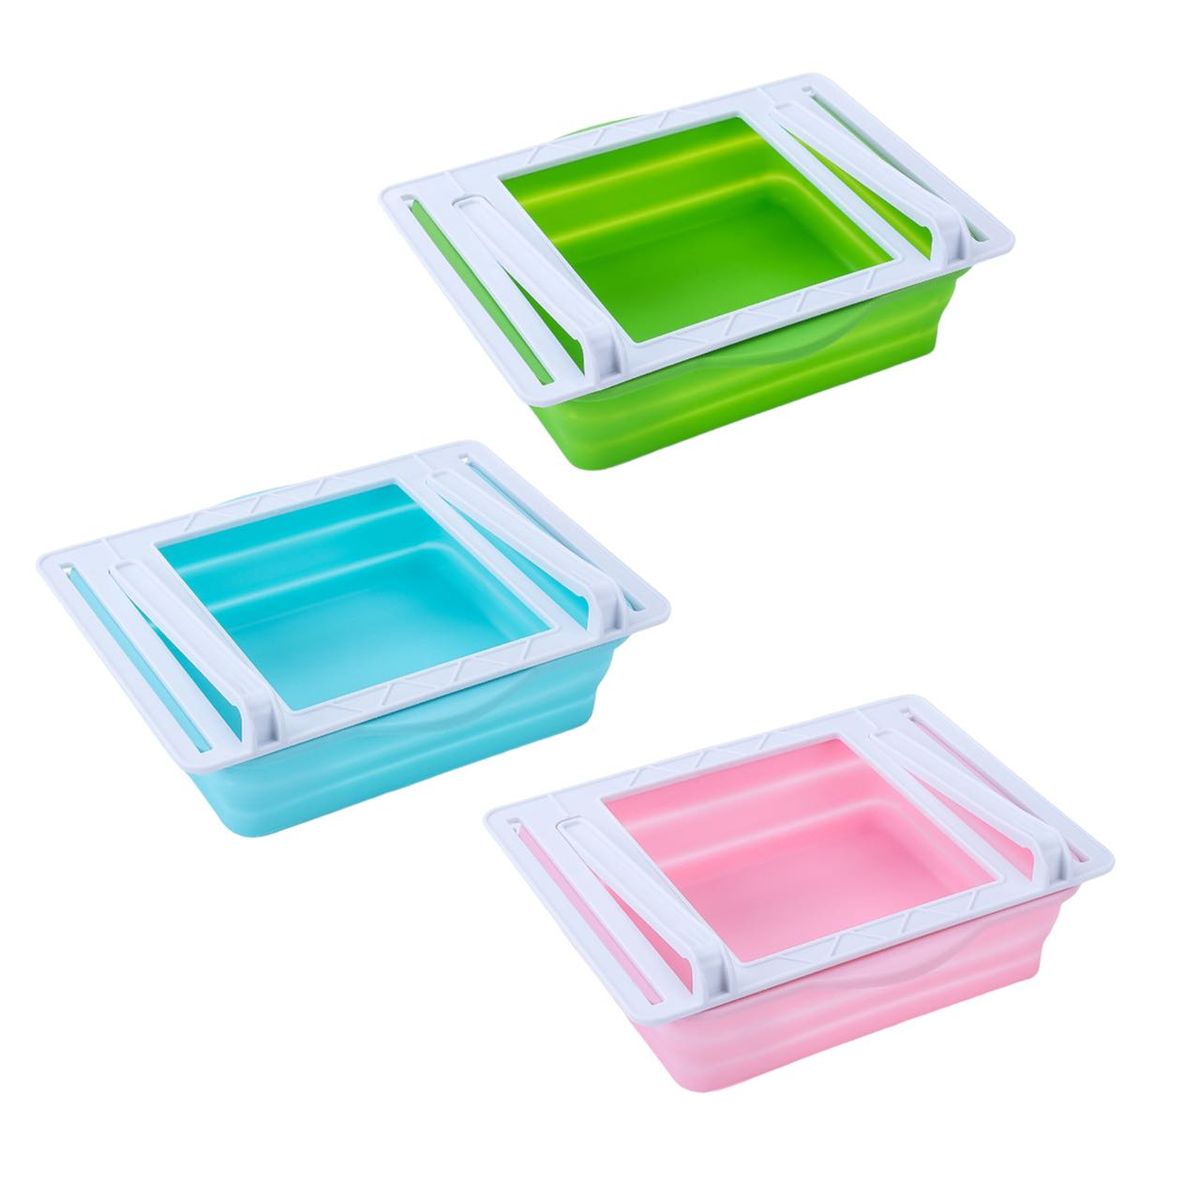 Retractable Pull-Out Drawer Refrigerator Organizer - Pack of 3 | Buy ...